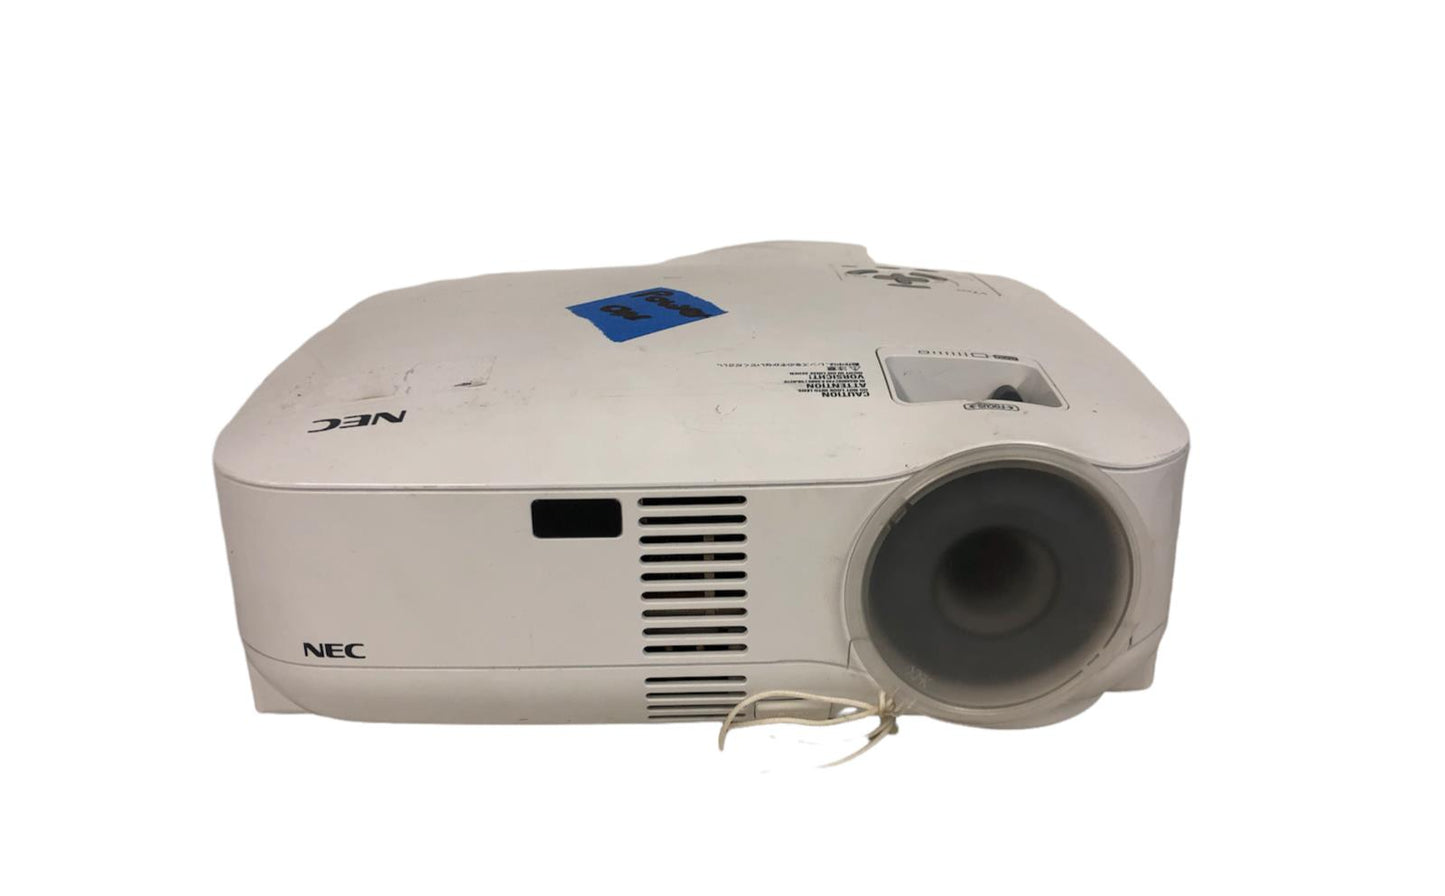 NEC VT695 Home Office Theater Projector 604 Lamp Hours Left